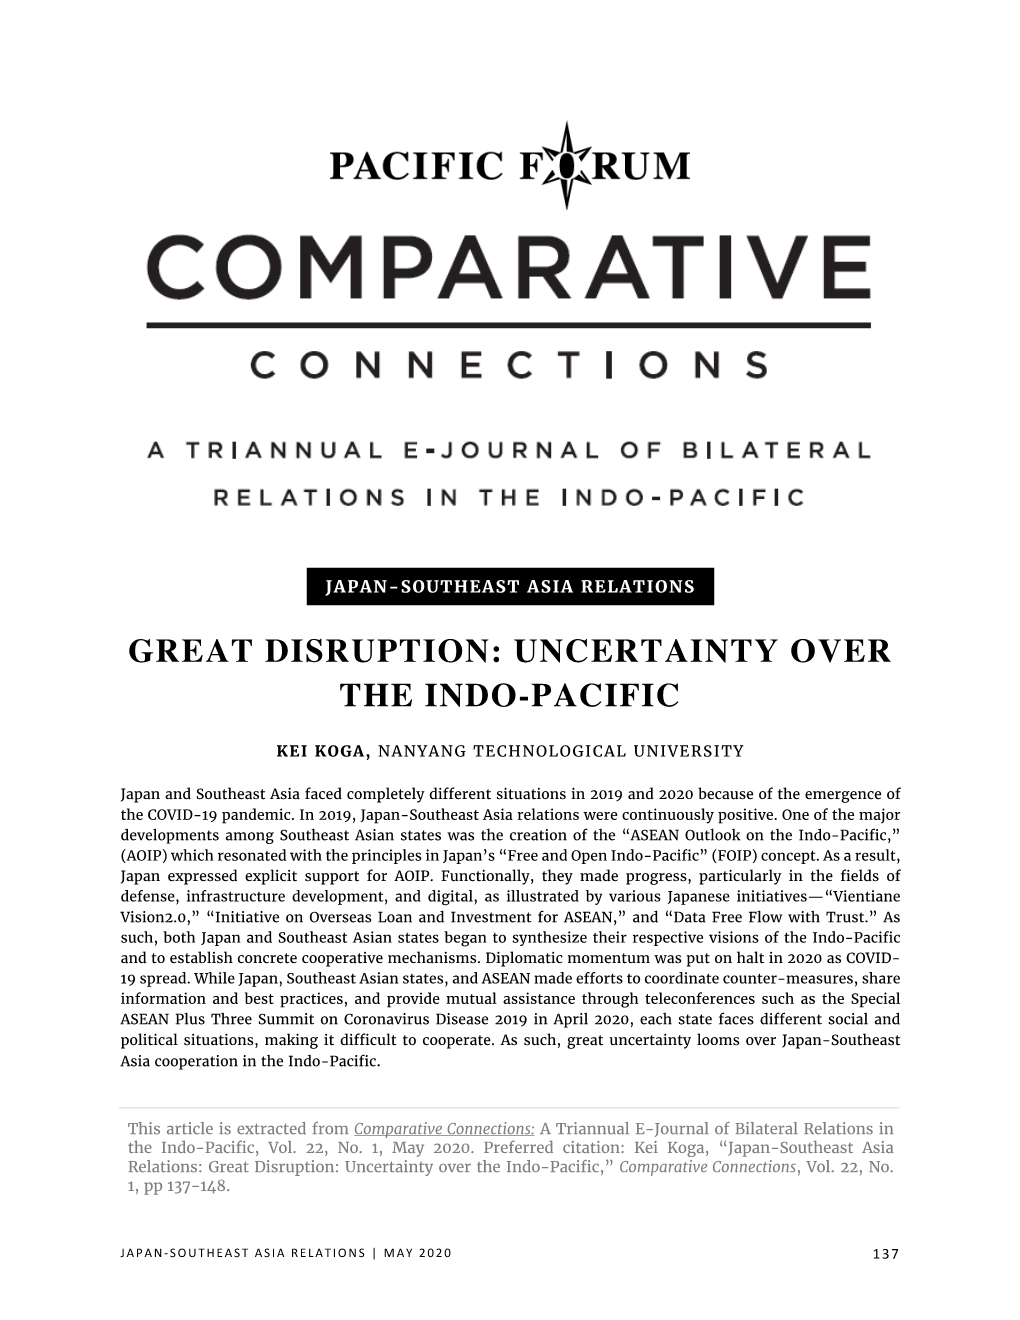 Japan-Southeast Asia Relations: Great Disruption: Uncertainty Over the Indo-Pacific,” Comparative Connections, Vol